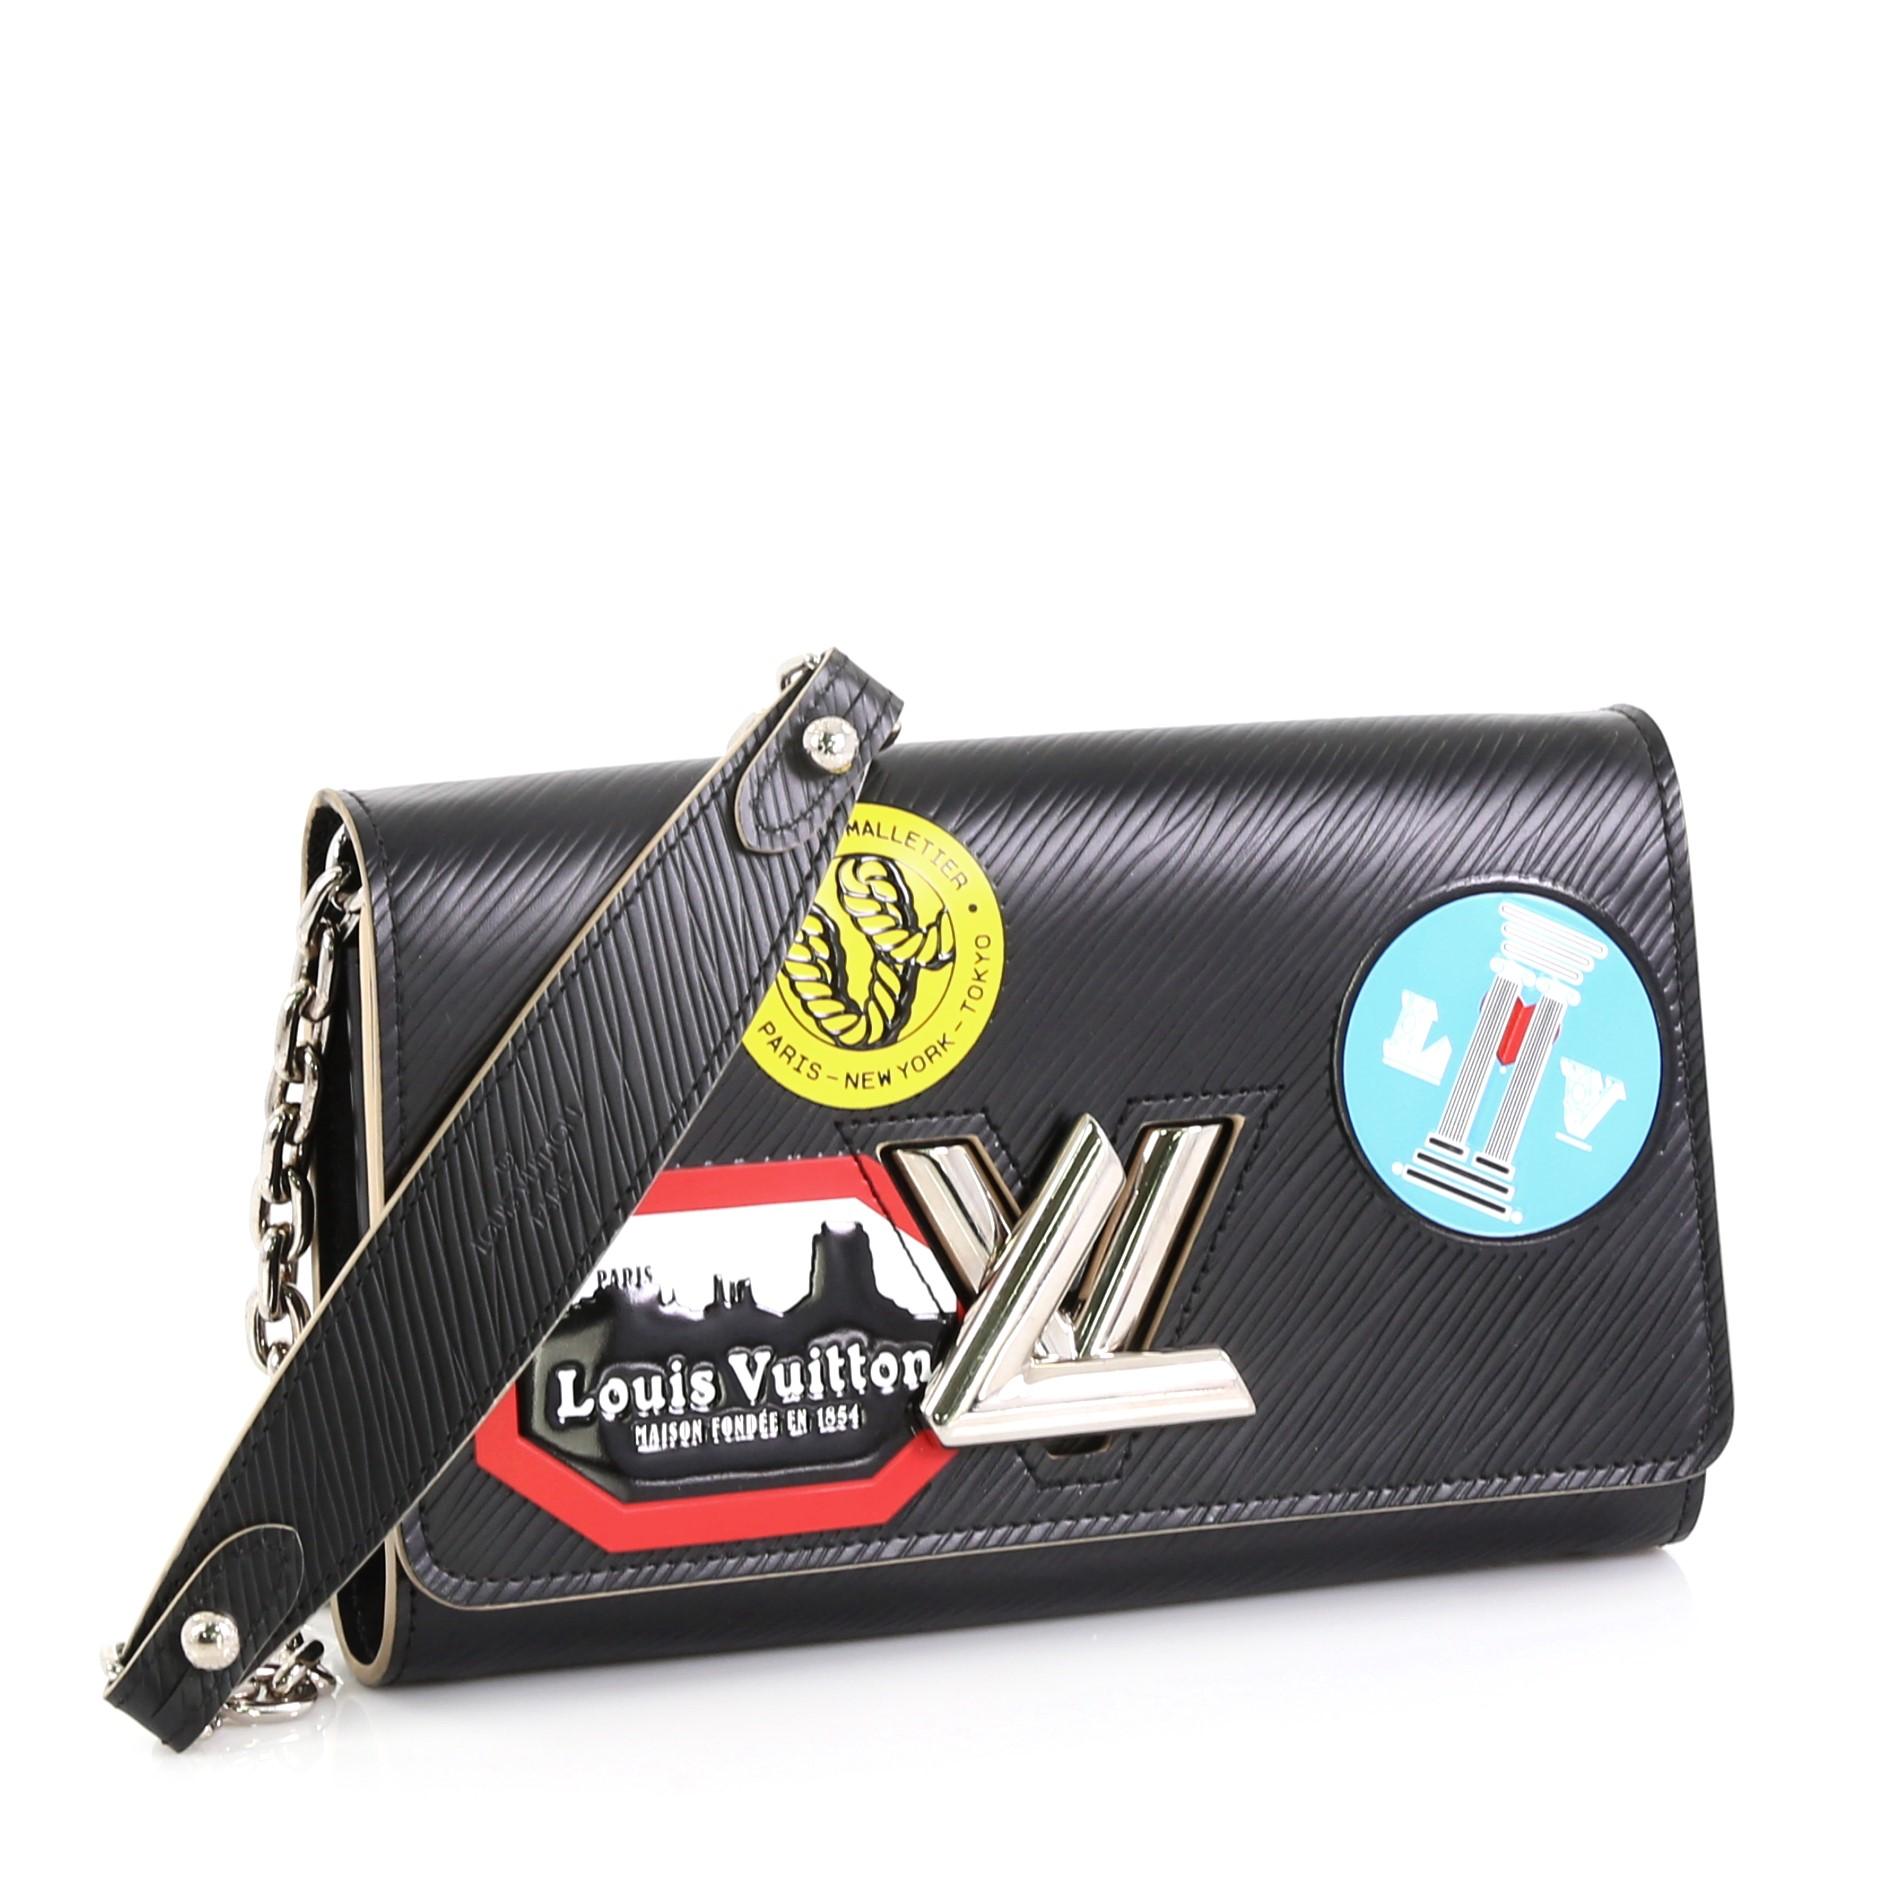 This Louis Vuitton Twist Chain Wallet Limited Edition World Tour Epi Leather, crafted in black epi leather, features LV twist lock, shoulder chain strap, and silver-tone hardware. Its flap opens to a black leather interior with multiple card slots,